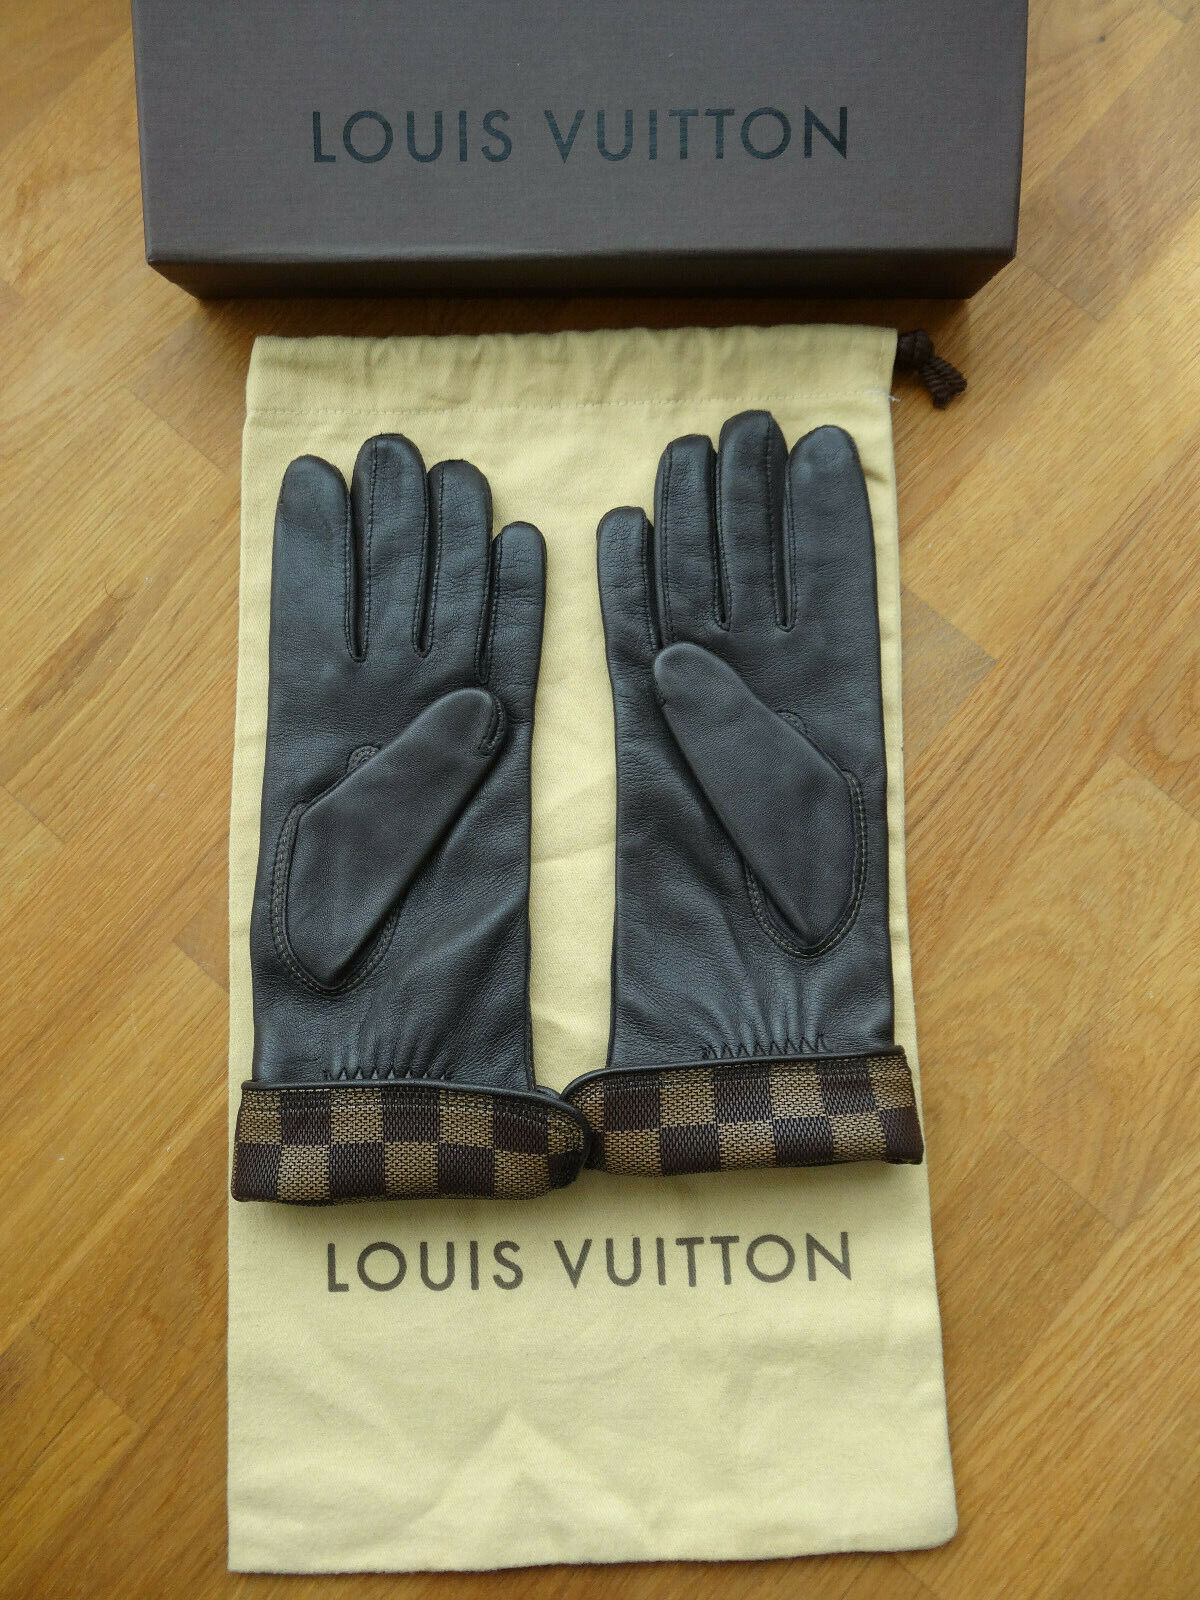 Louis Vuitton Damier Ebene Leather Gloves, Brown, Size 7.5, NOS in box,  dust bag